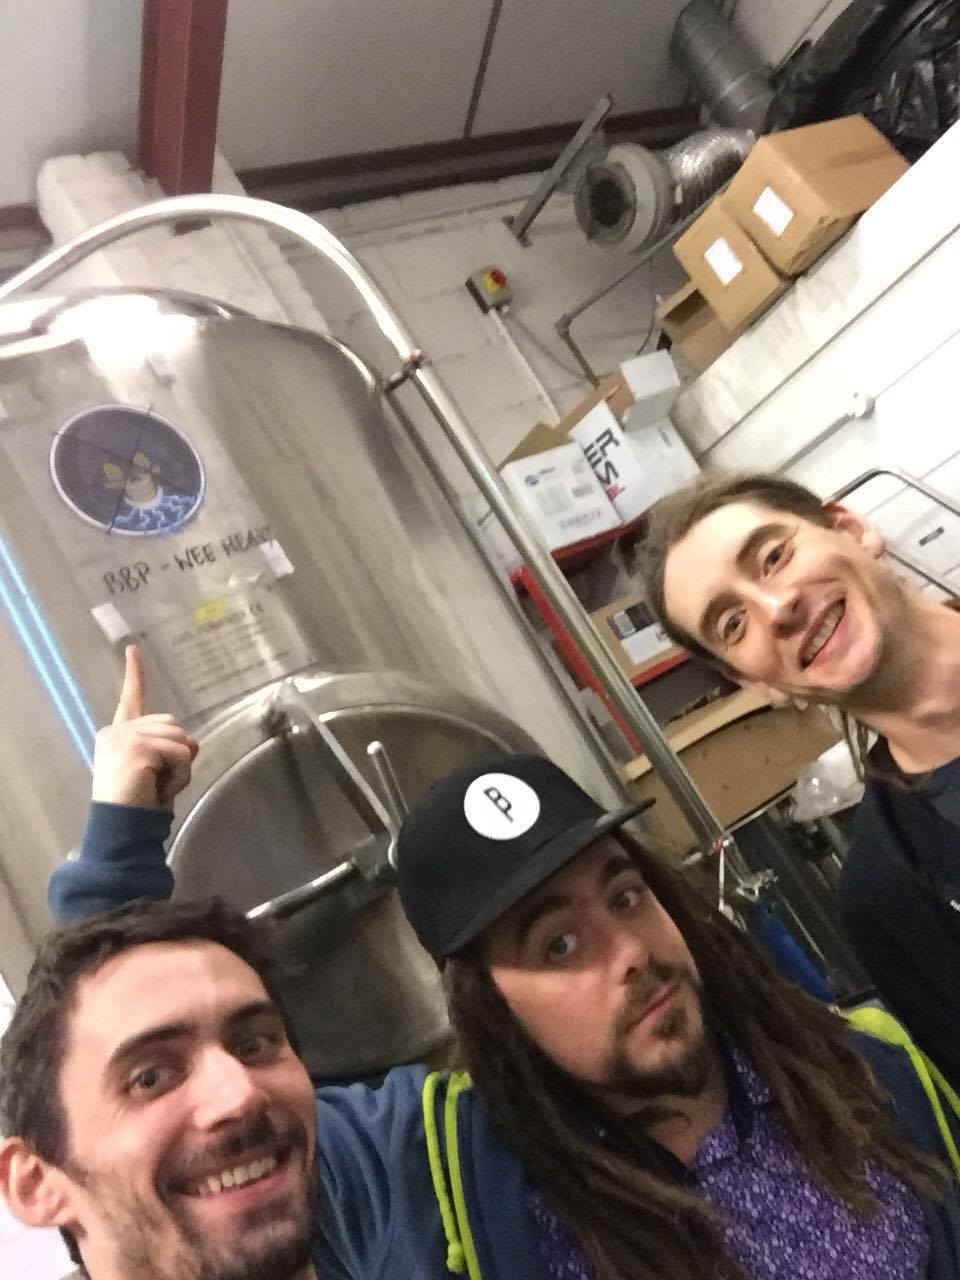 Brewers (left-right): Ryan, Yves and Kit